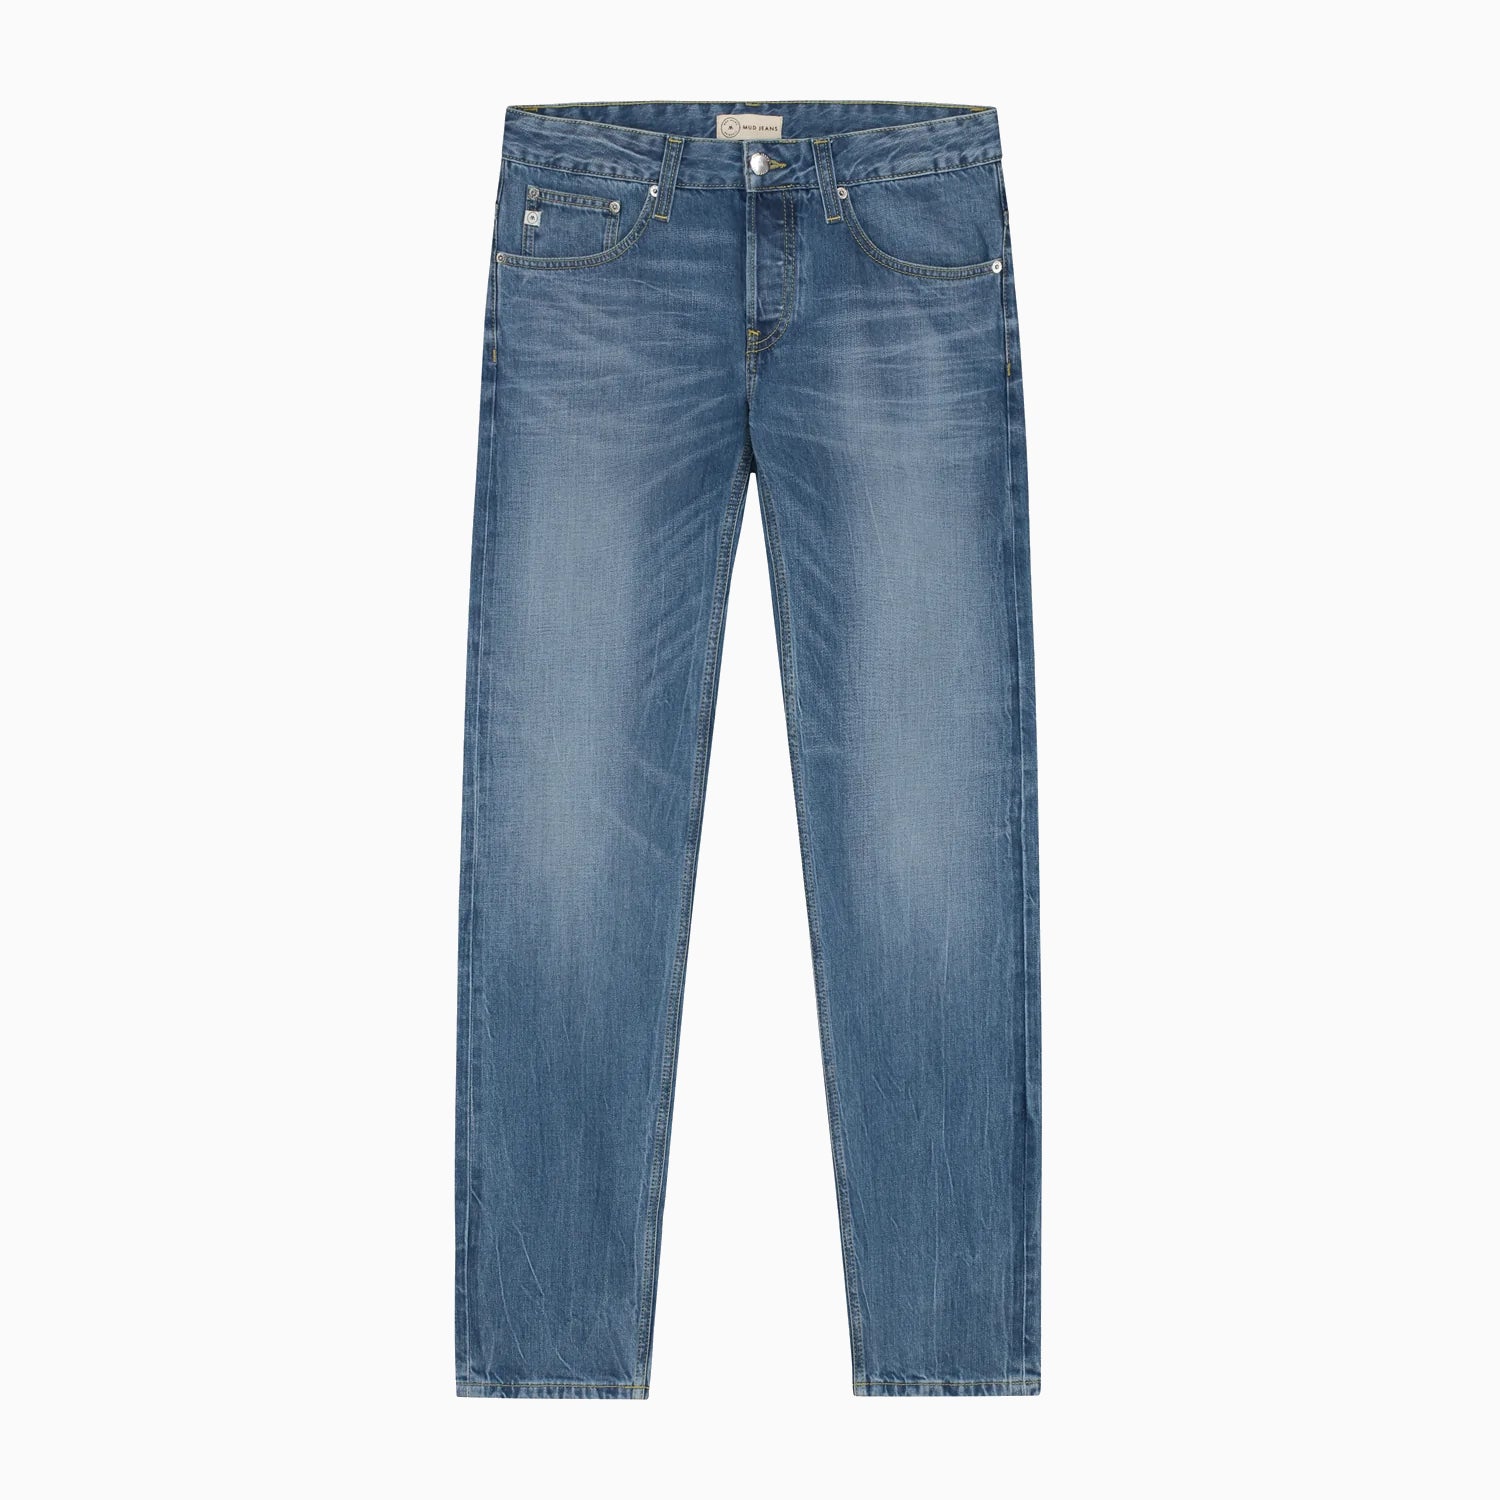 Mud Jeans Regular Dunn Tapered Deadstock Stretch Jeans